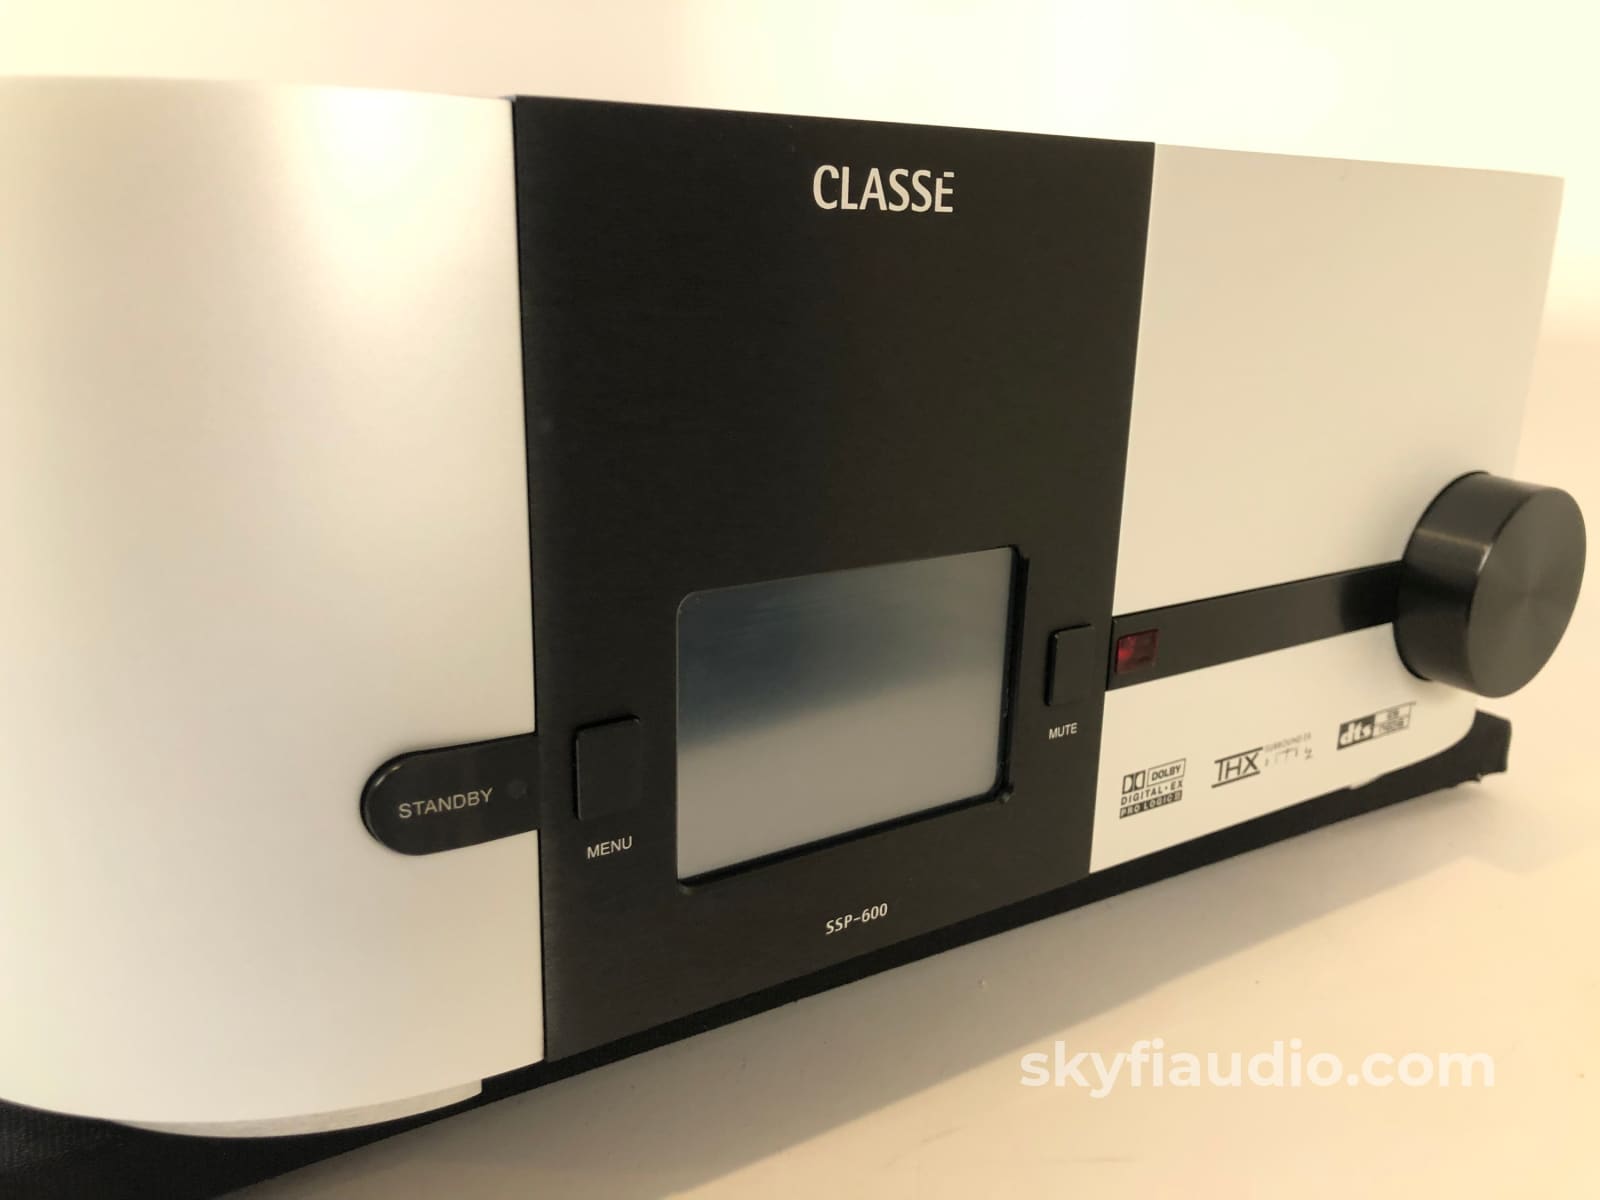 Classe Ssp-600 Theater Processor / Switchable Two Channel Preamp Preamplifier